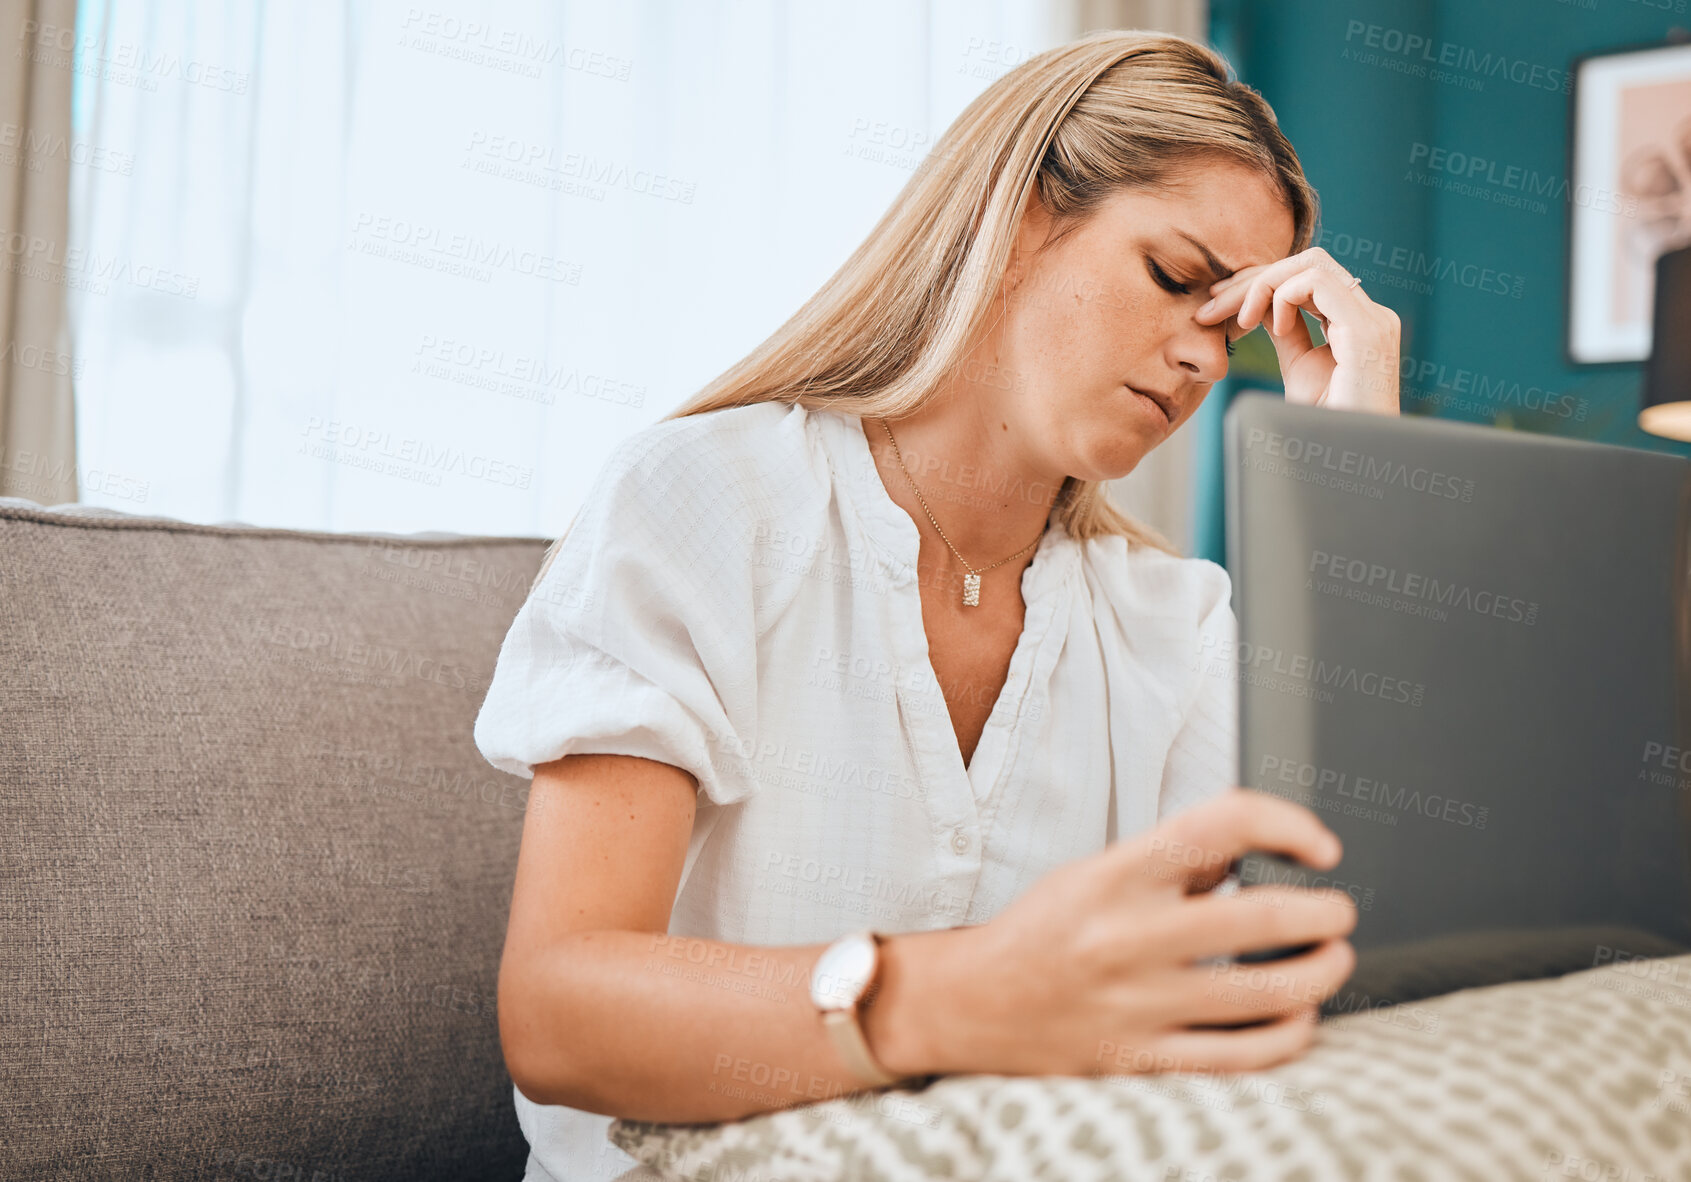 Buy stock photo Headache, laptop and business woman with debt stress and technology report burnout. Anxiety, mental health problem and tired employee on a computer glitch and 404 tech issue feeling frustration